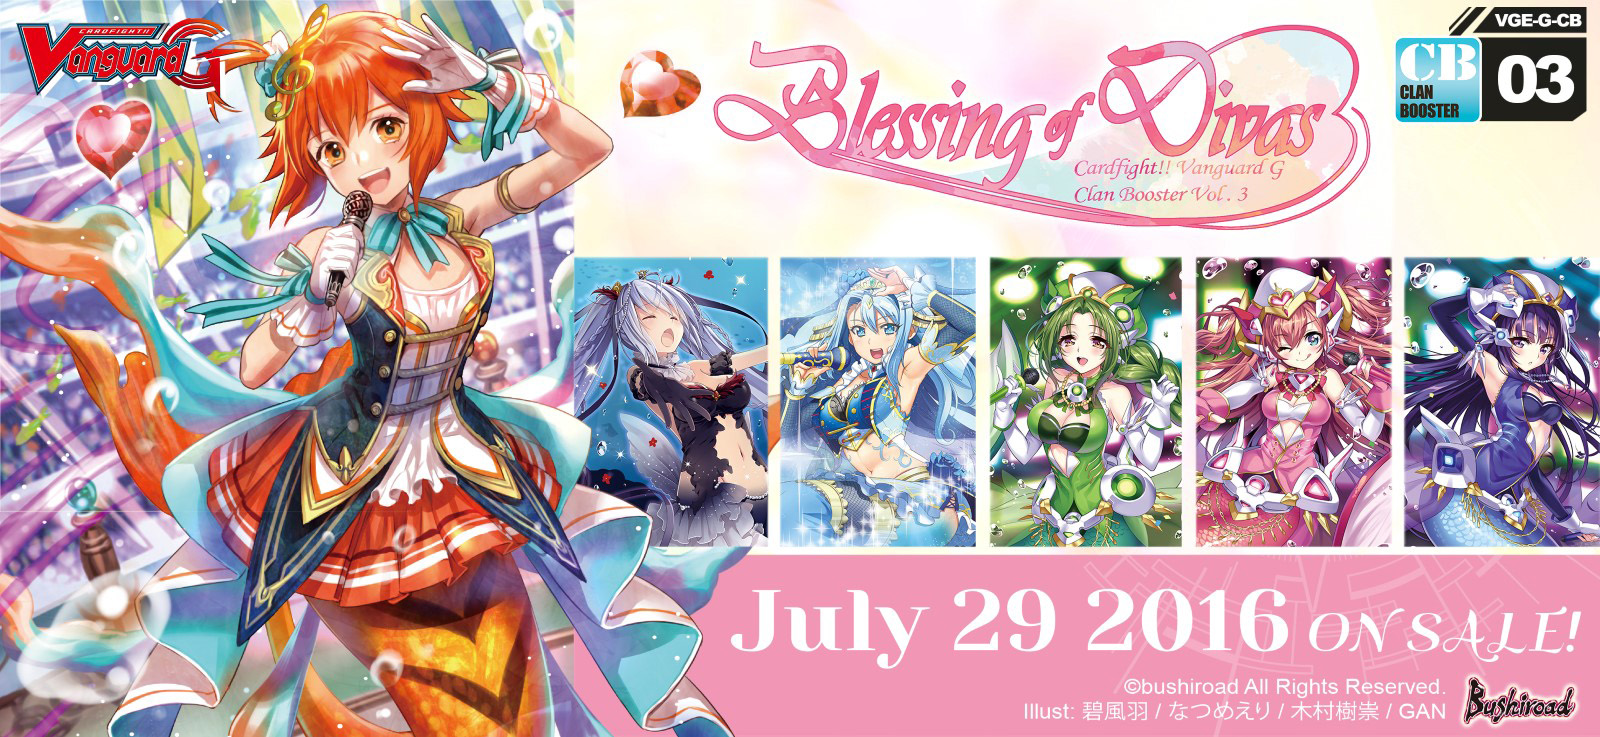 Boosters G-CB03 - Blessing of Divas